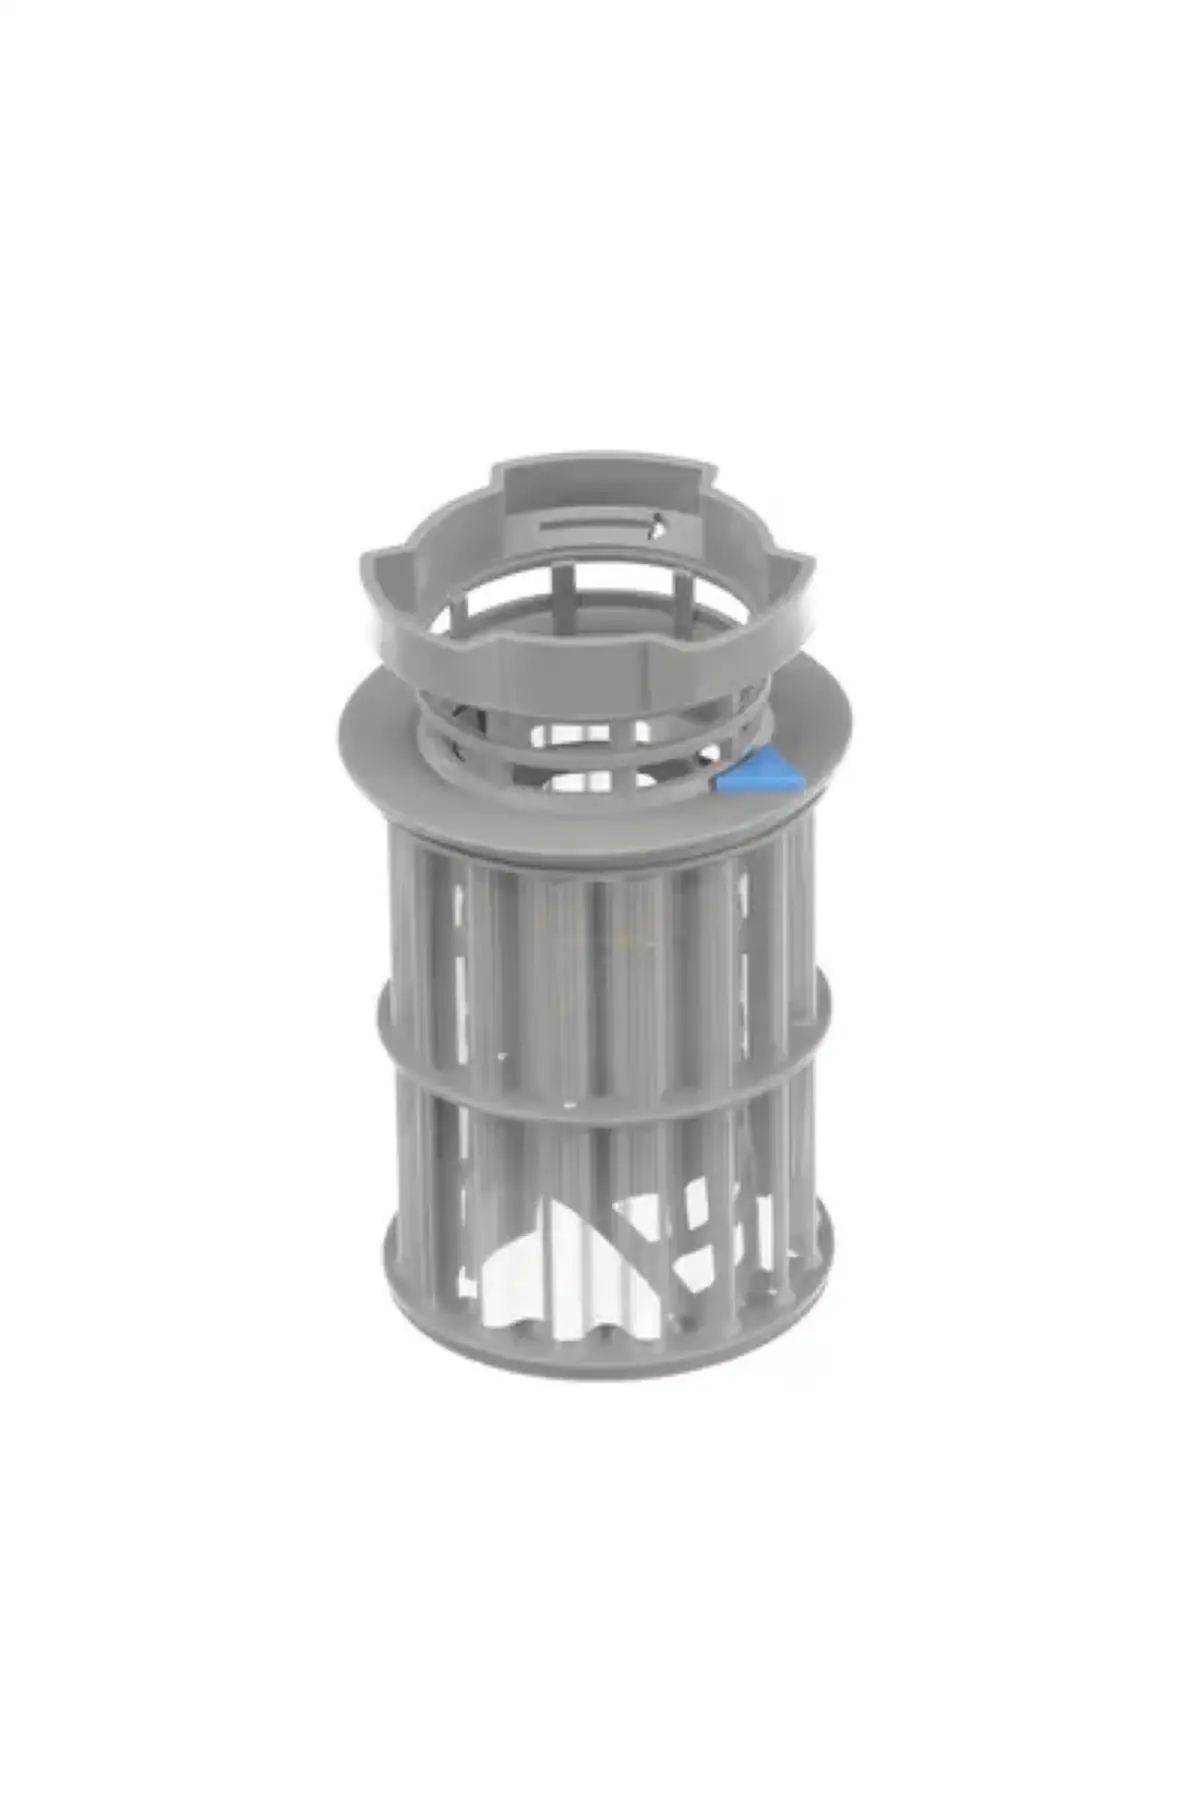 Sieve Micro Filter for Dishwasher 00645038 645038 436716 Parts Replacement for Bosch Siemens Neff Constructa Balay Filter